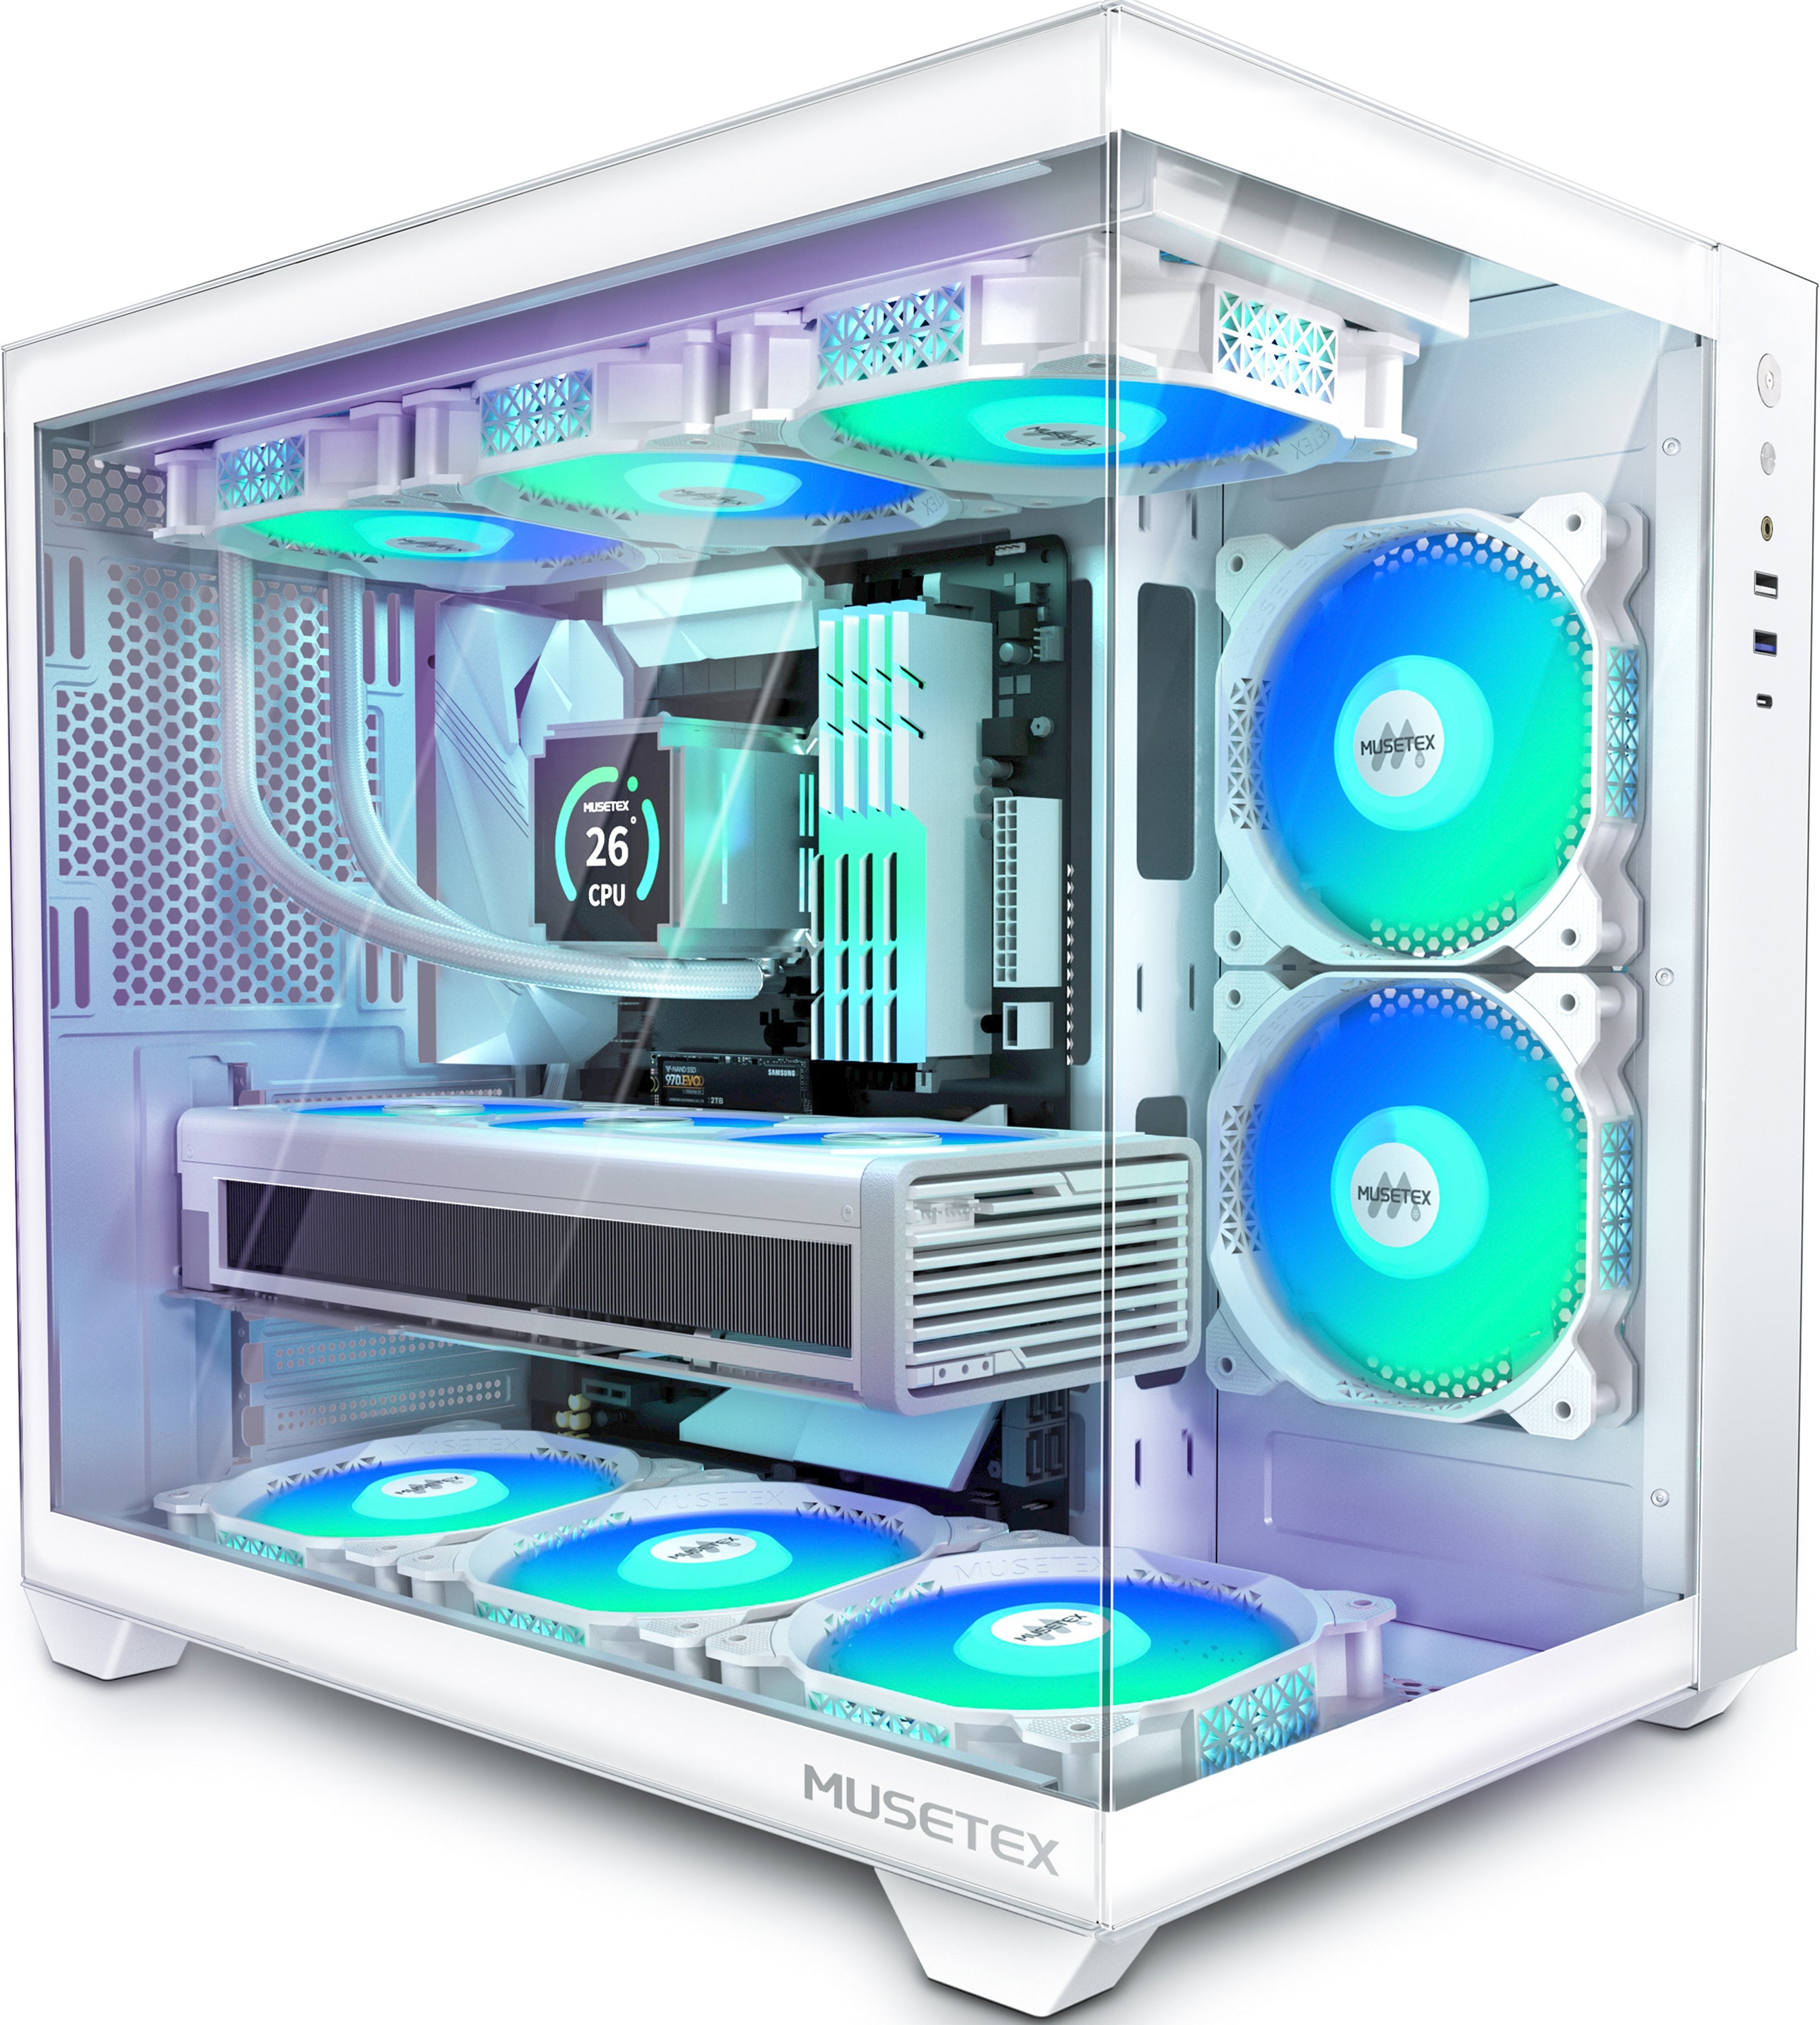 MUSETEX ATX PC Case,5 PWM ARGB Fans Pre-Installed,360MM RAD Support,Type-C Gaming PC Case,270° Full View Tempered Glass Mid Tower PC Case,Pure White ATX Computer Case,Y6